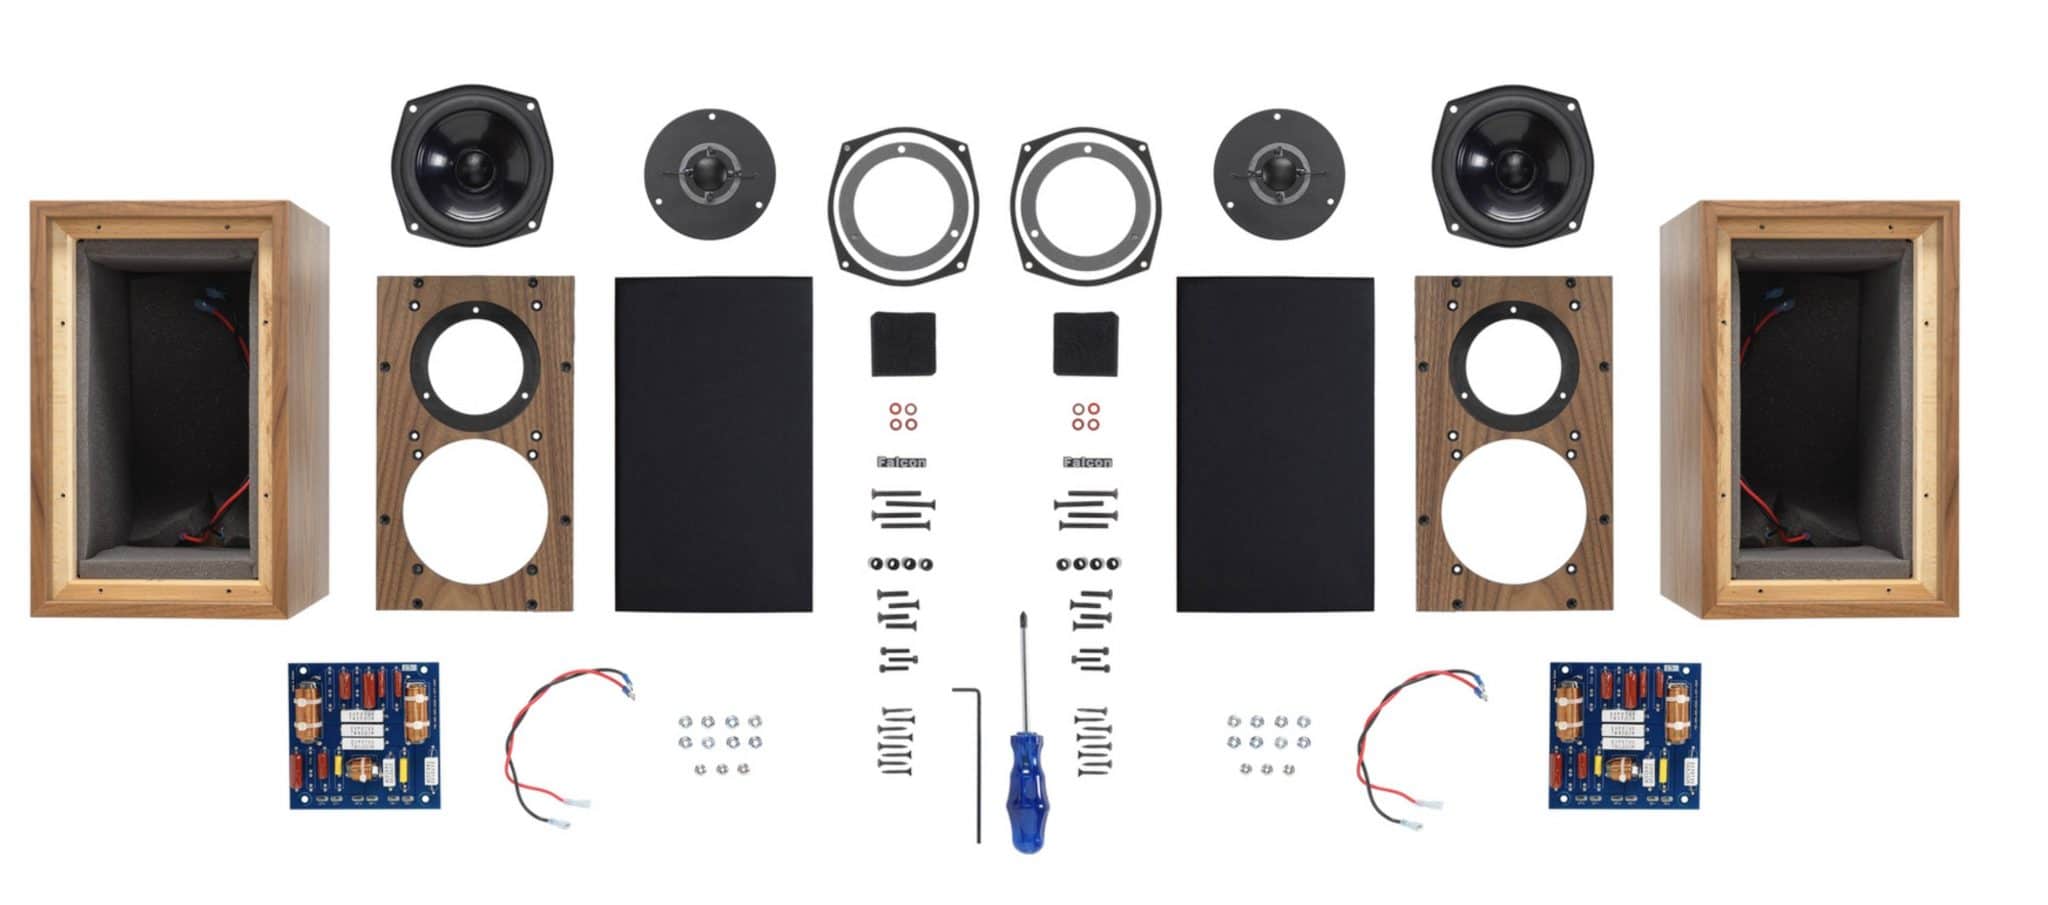 Two Hour Speaker Kit From Falcon Acoustics